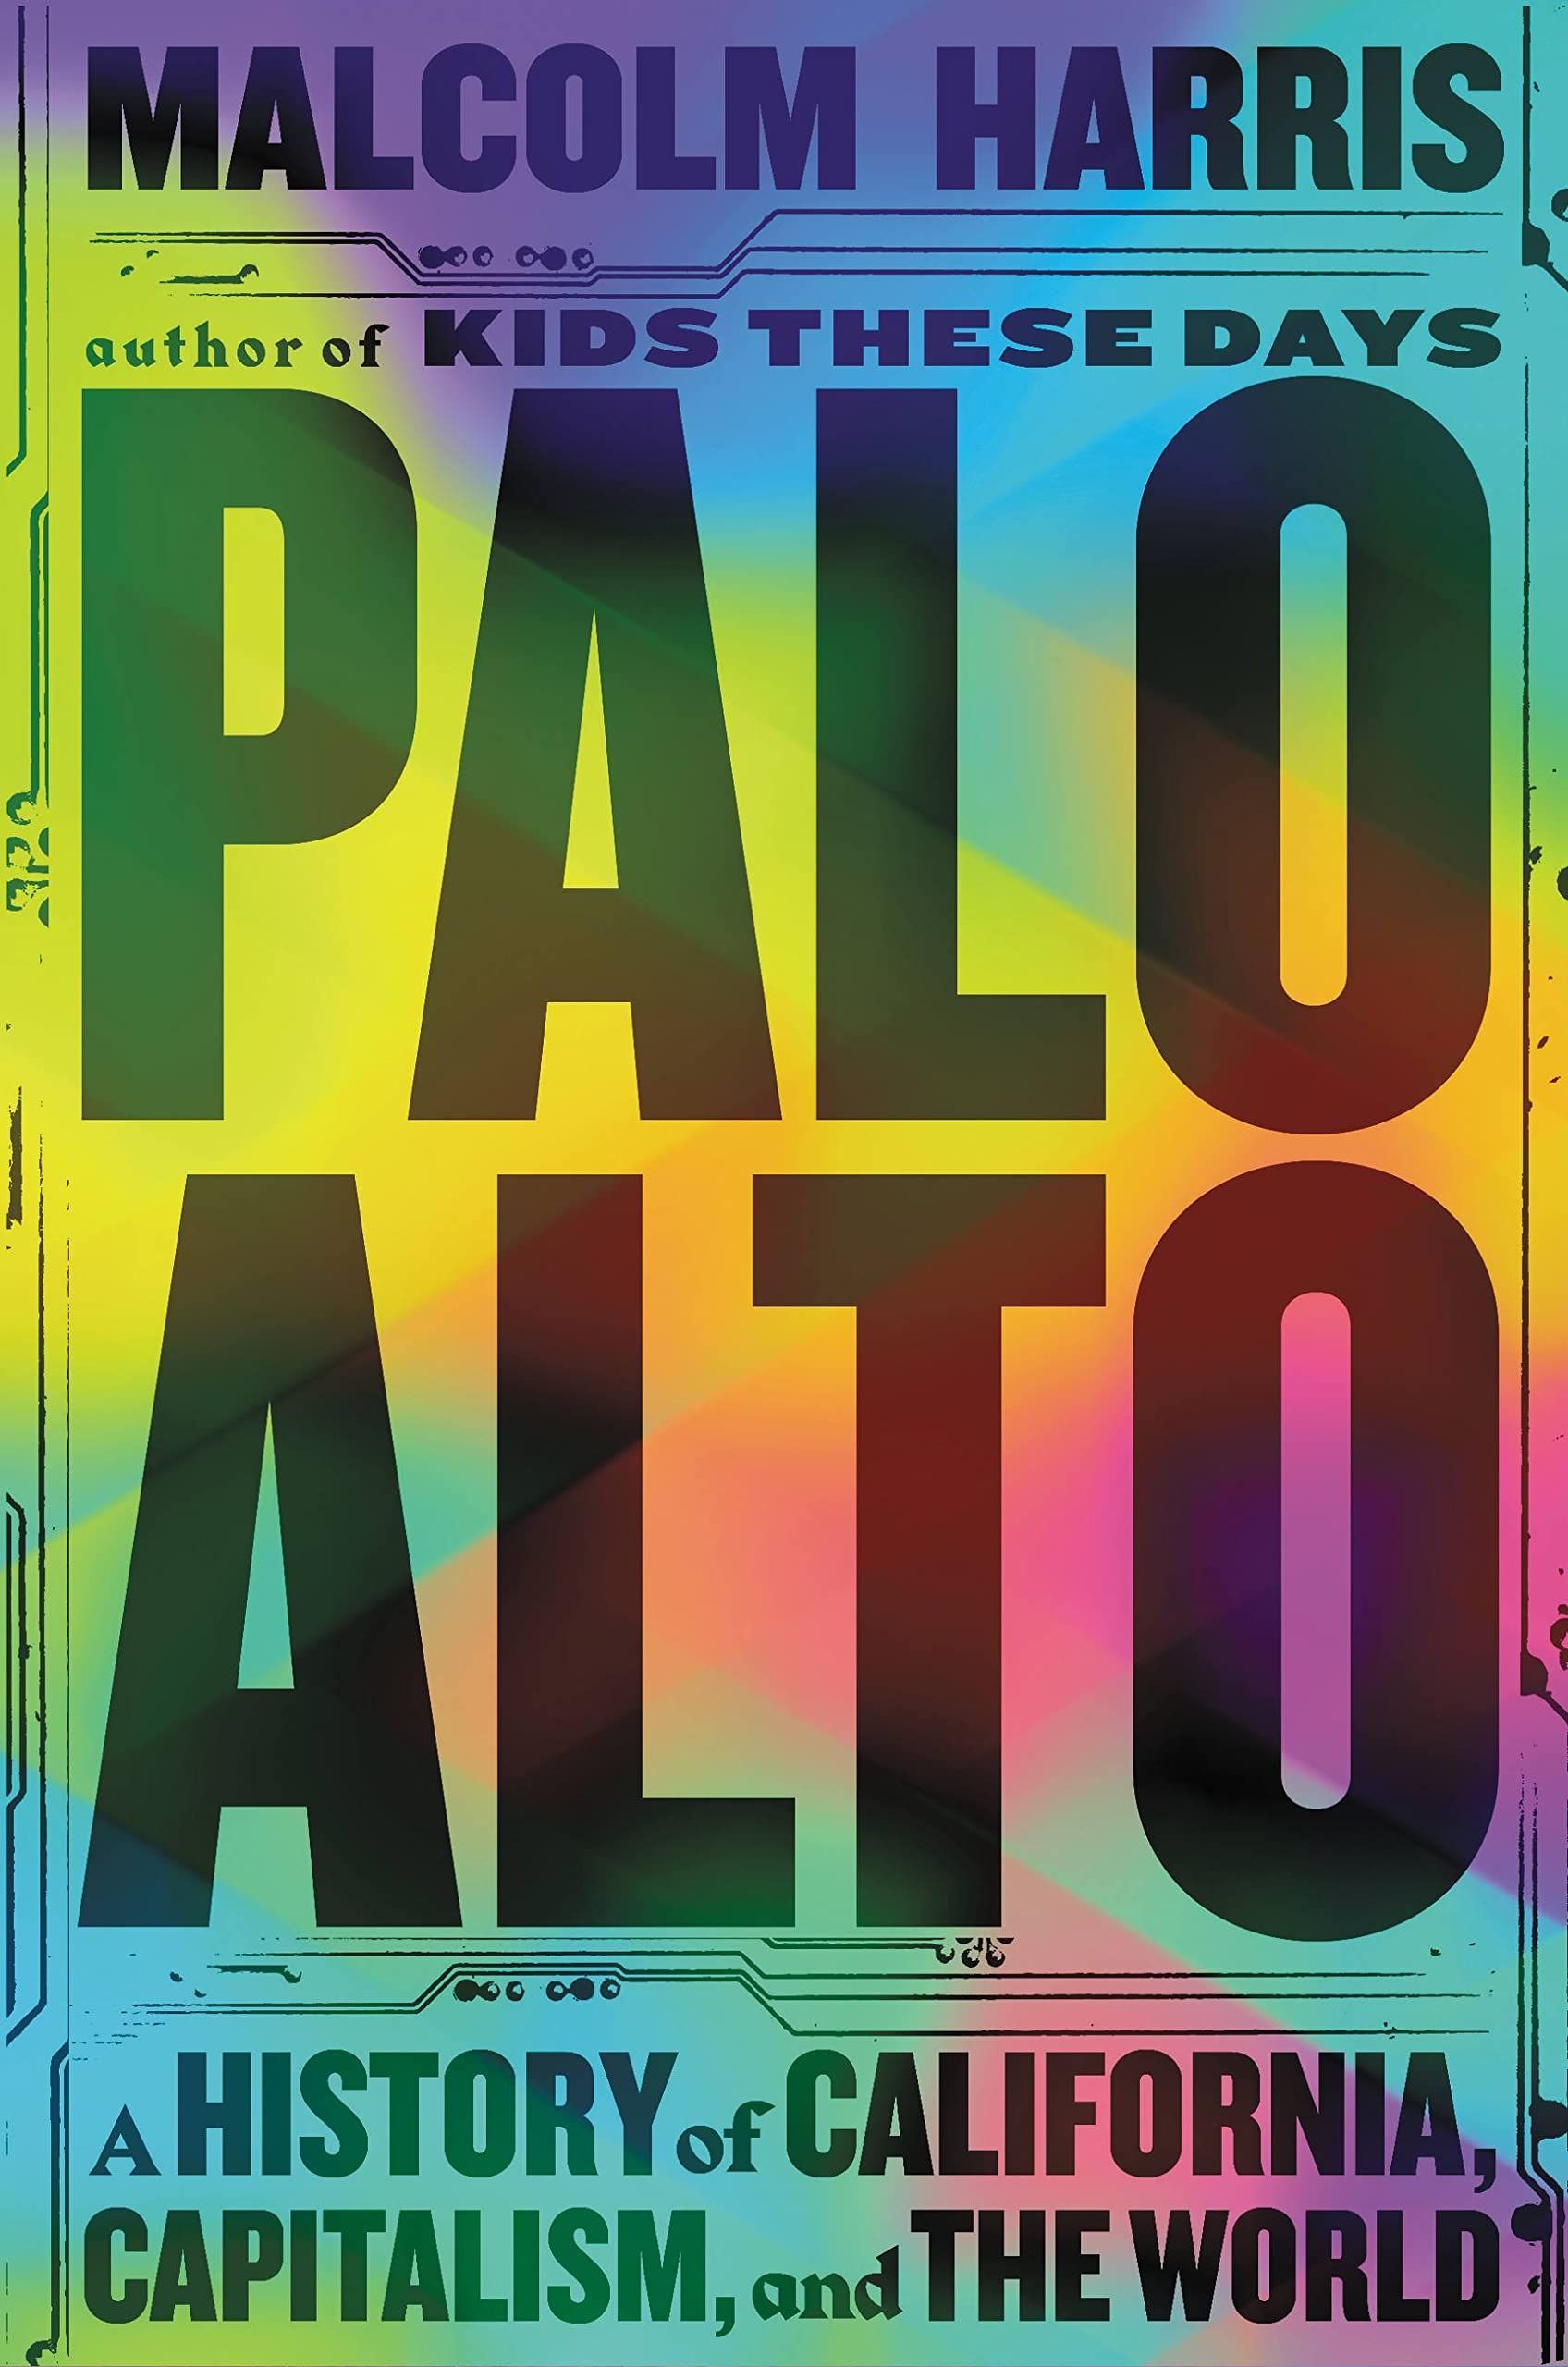 The Children of California Shall Be Our Children: On Malcolm Harris’s “Palo Alto”